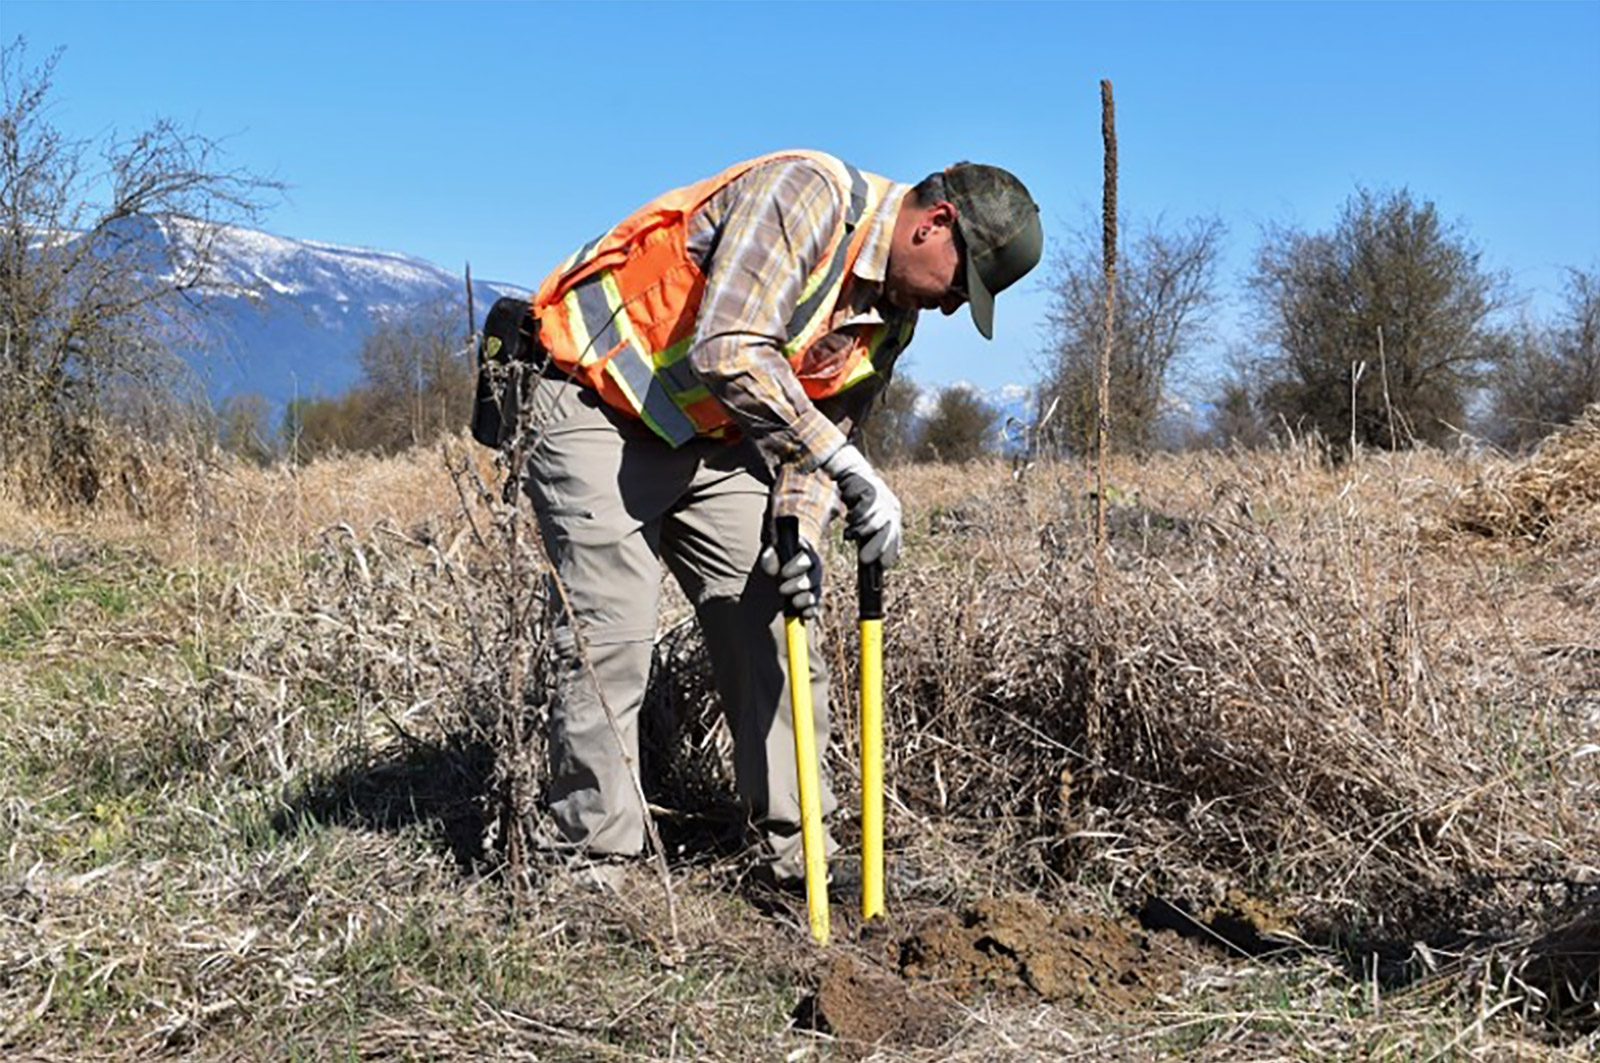 Norman Allard, LKB Community Planner digs a hole that is two to three feet deep to install poles for the wildlife cameras and audio recorders. (Photo: Cheyenne Bergenhenegouwen)